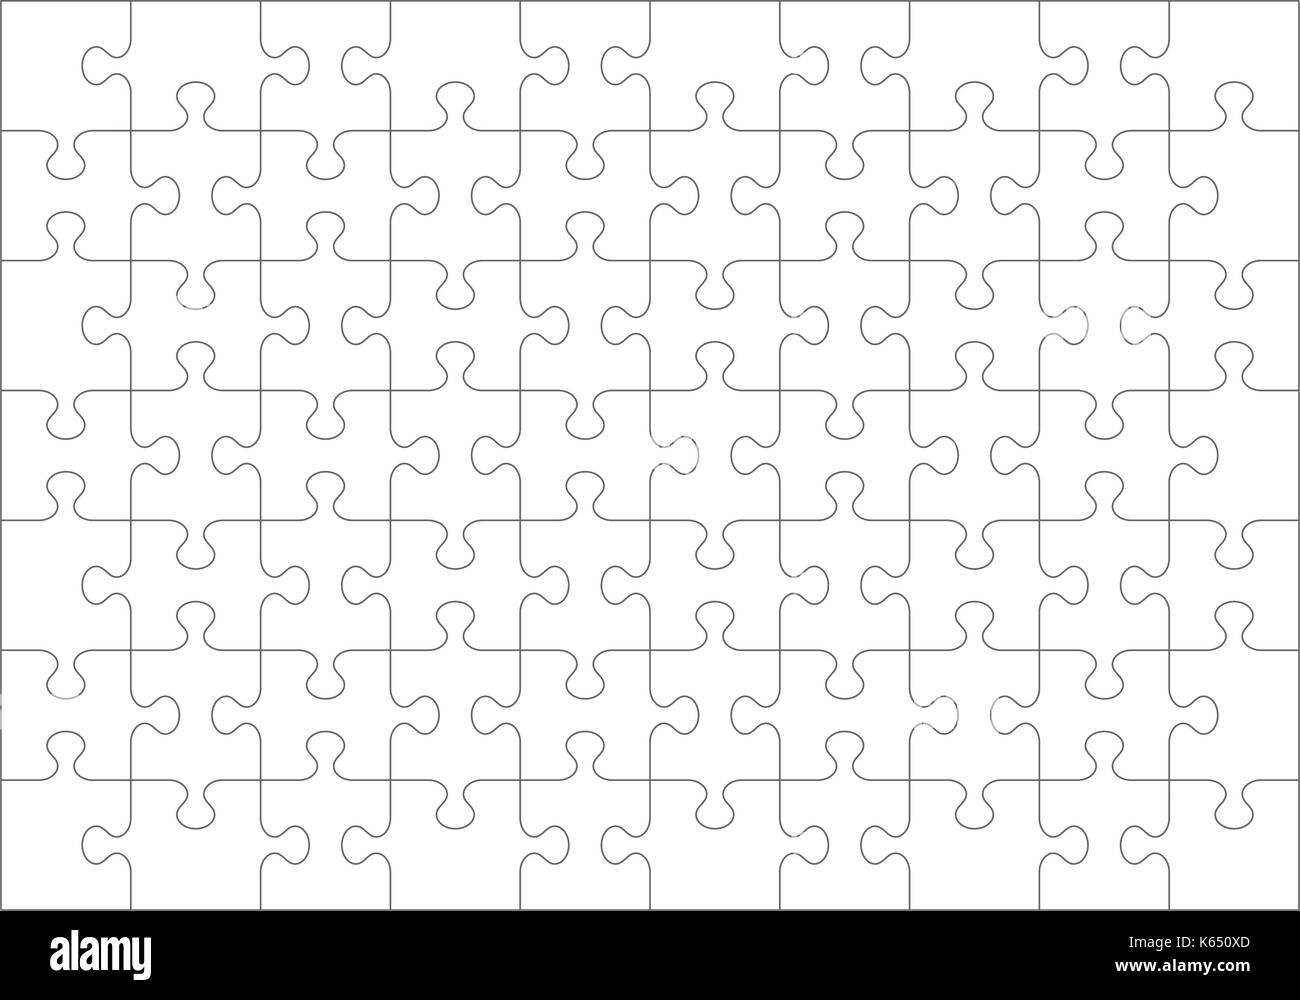 Jigsaw puzzle blank template or cutting guidelines of 21 Regarding Blank Jigsaw Piece Template